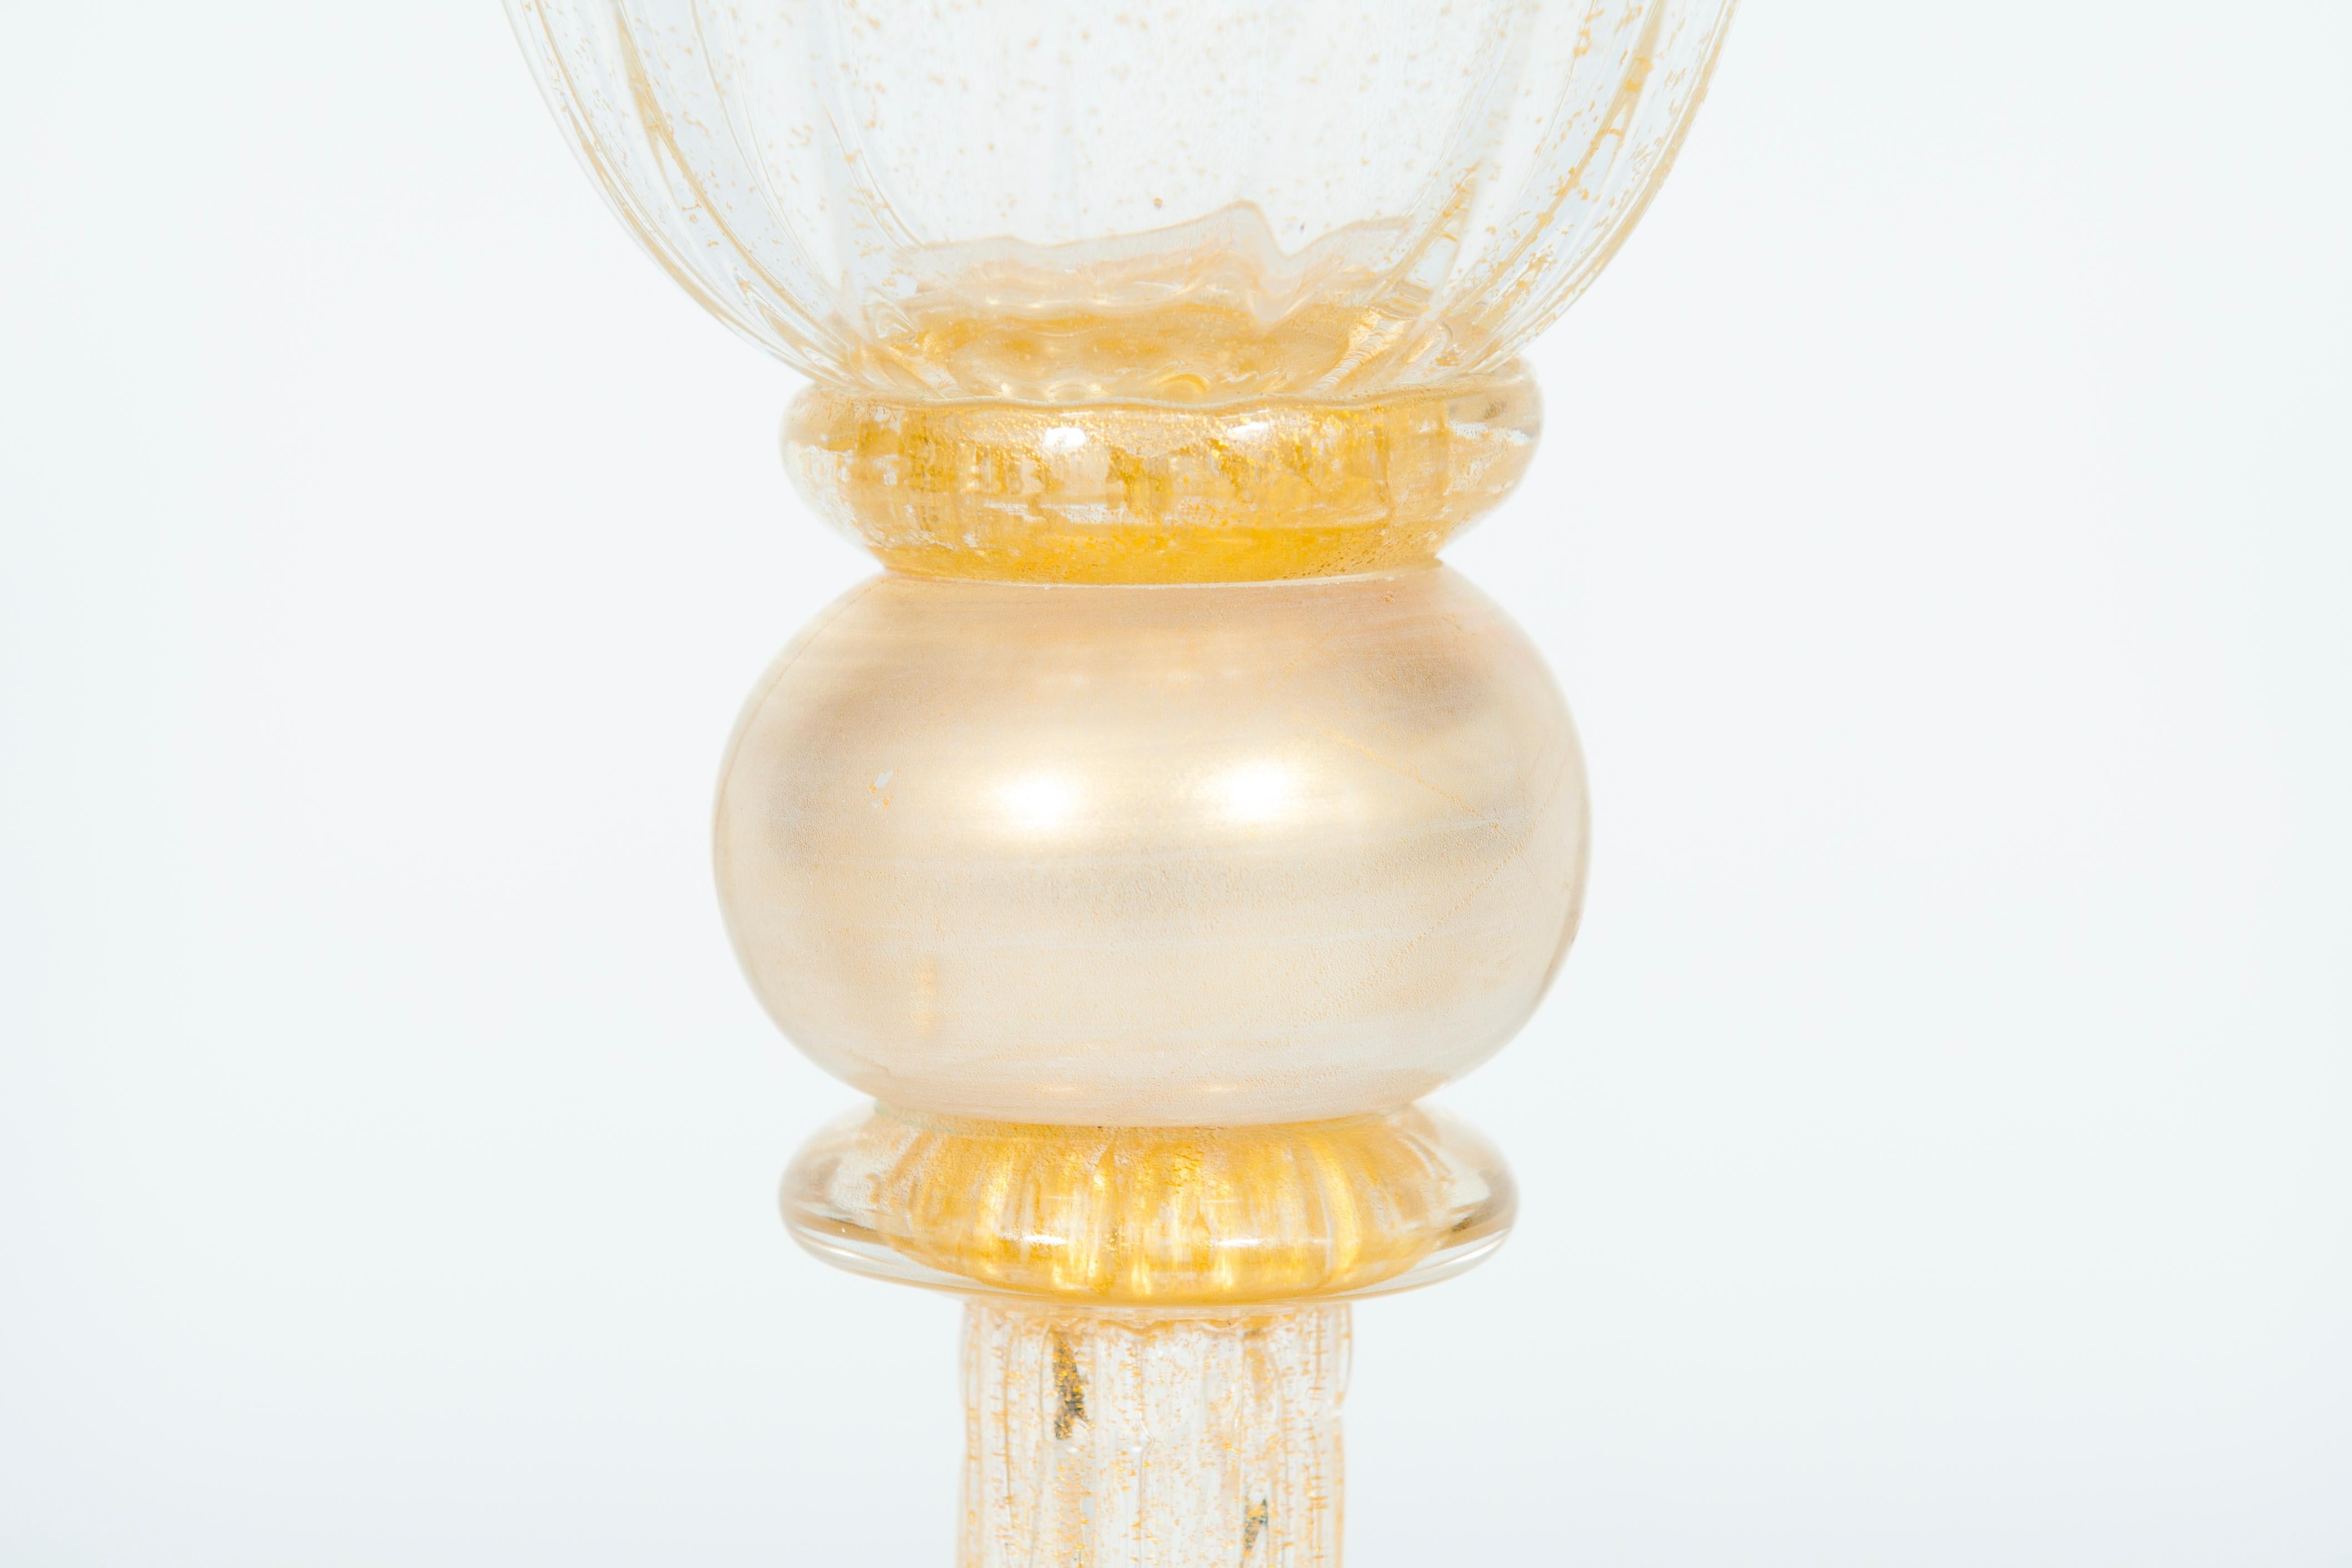 Baroque Revival High-End Murano Glass Goblet with Lid and Gold Finishes Italy 1960s For Sale